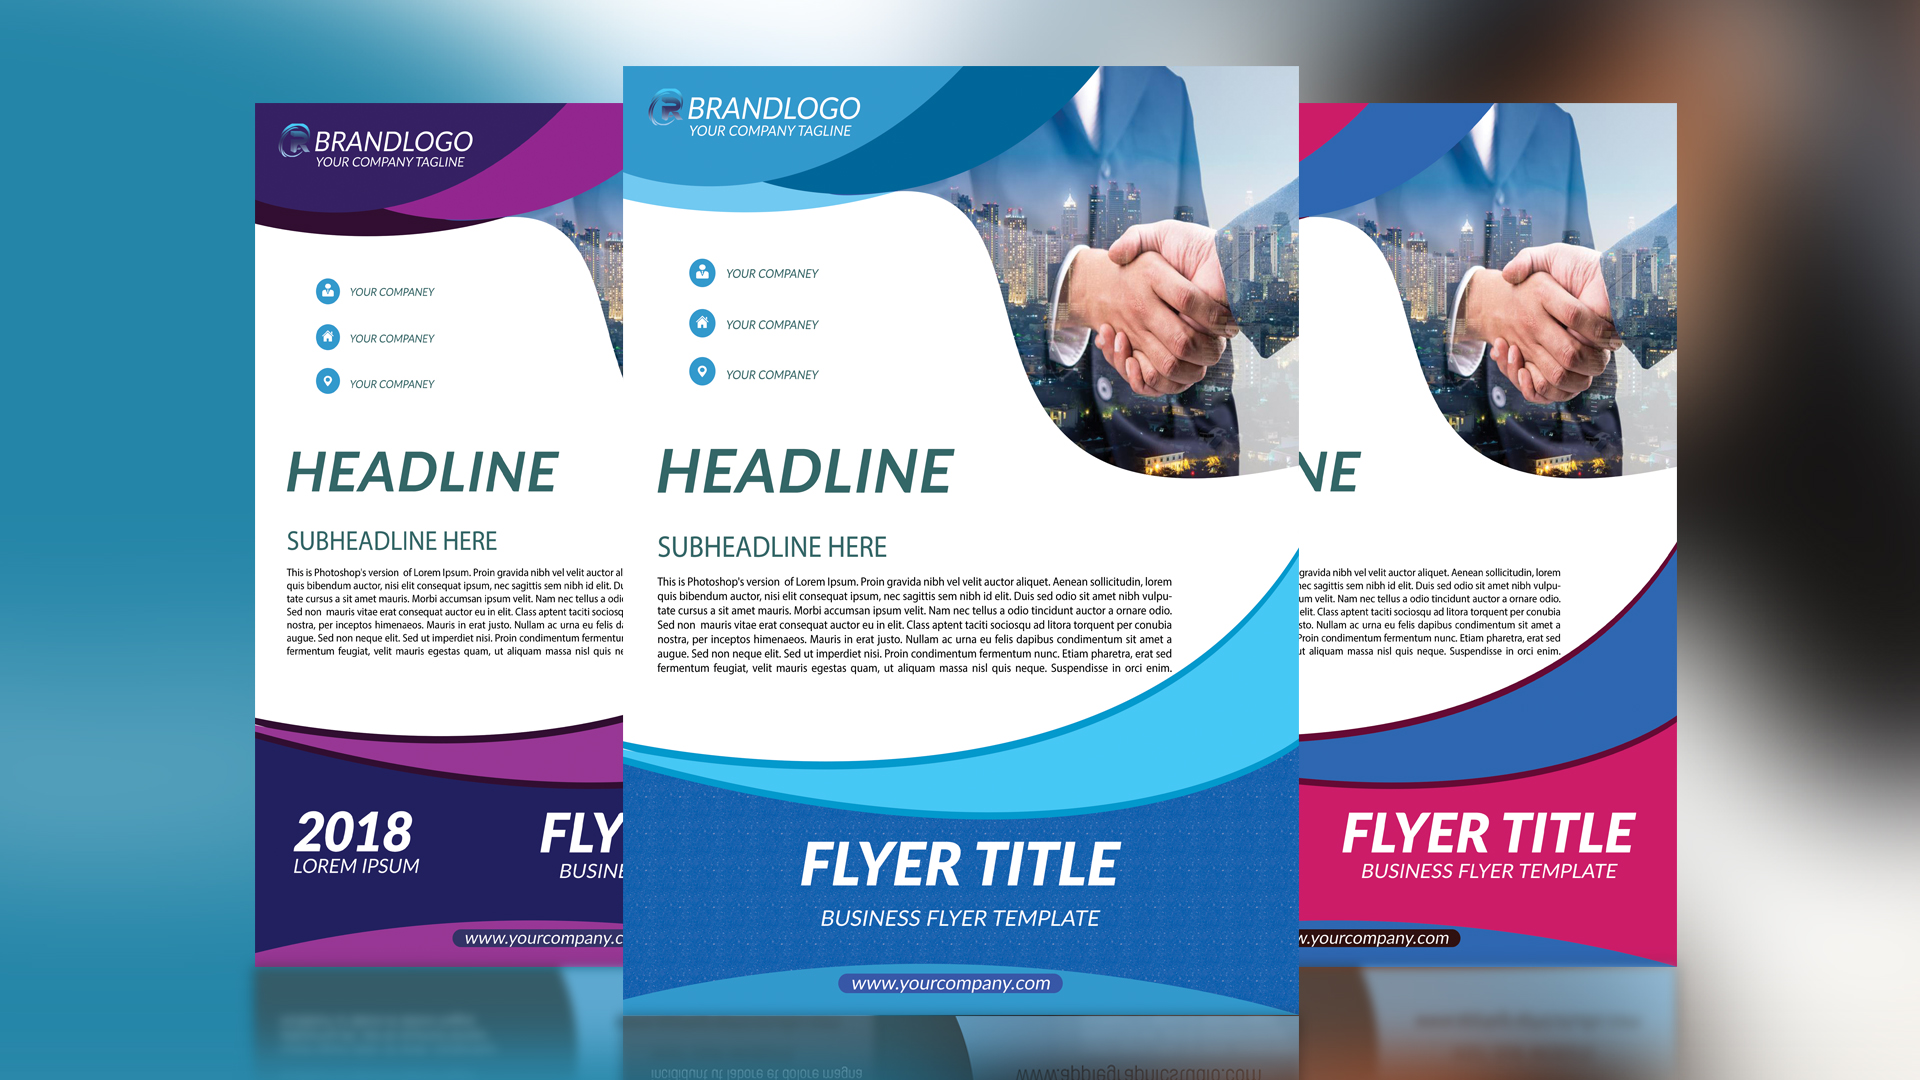 How to Make Business Flyers Online for Free Professional